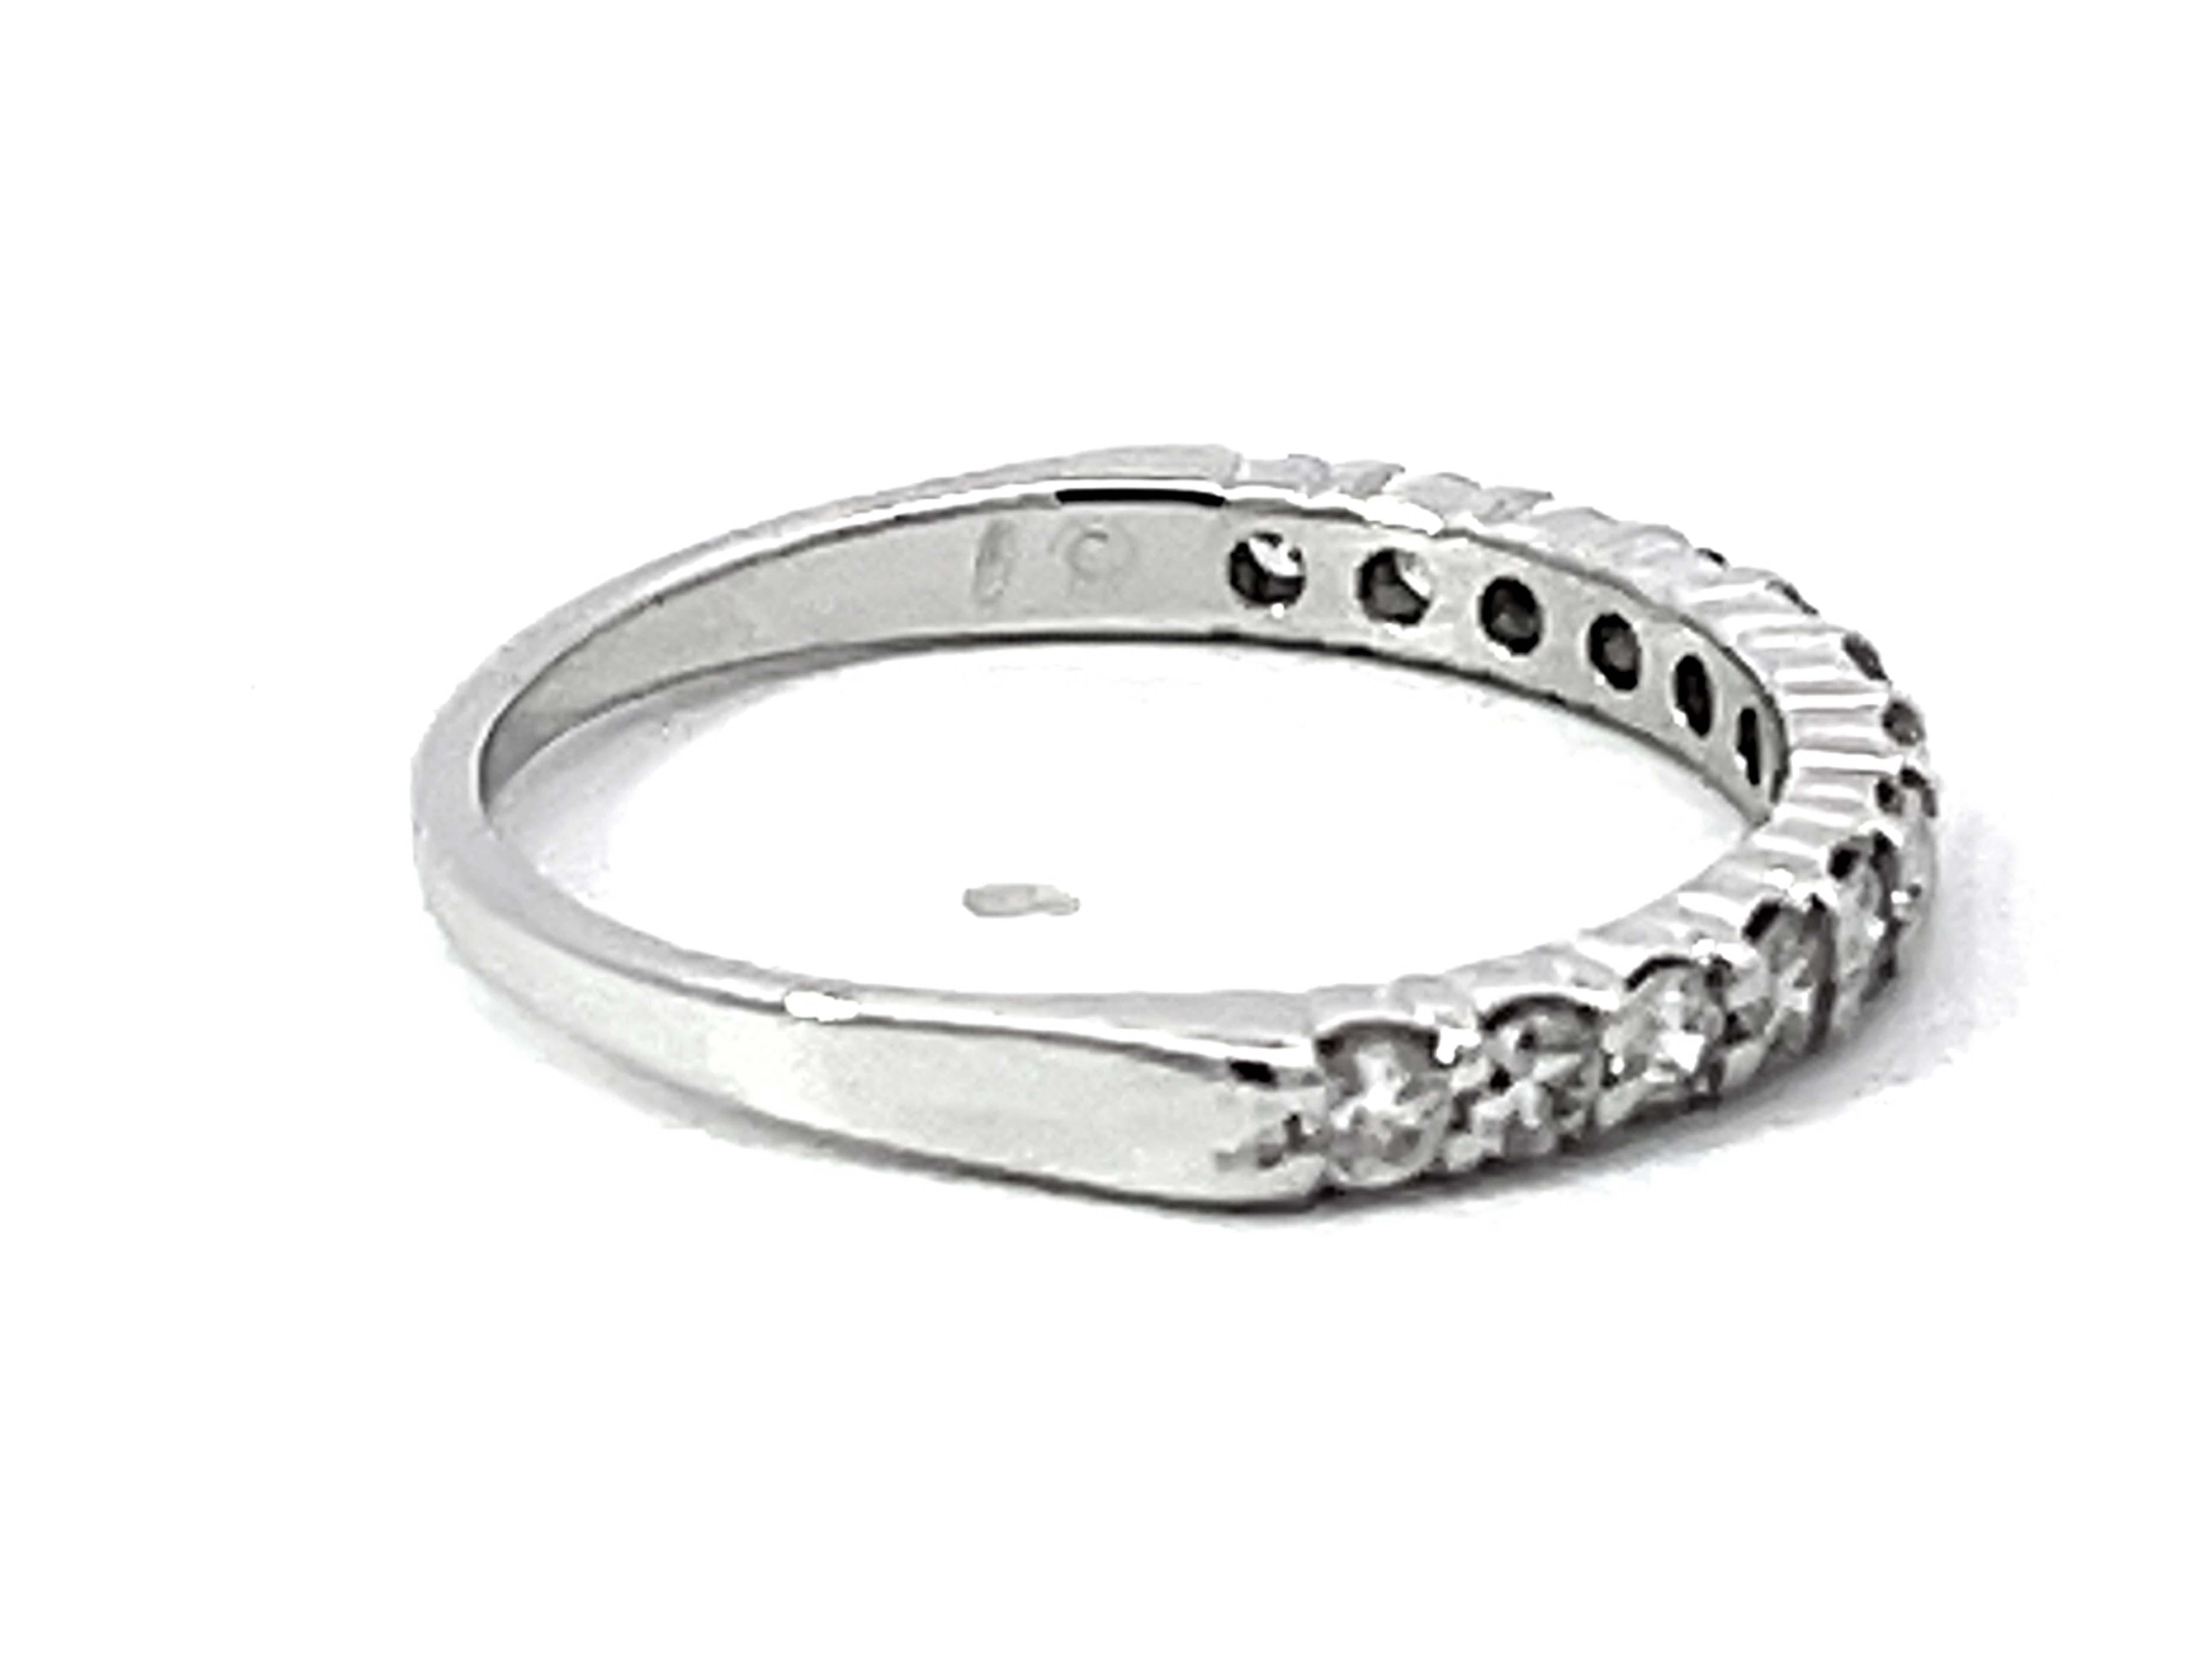 Women's Brilliant Cut Diamond Band Ring Solid 14k White Gold For Sale